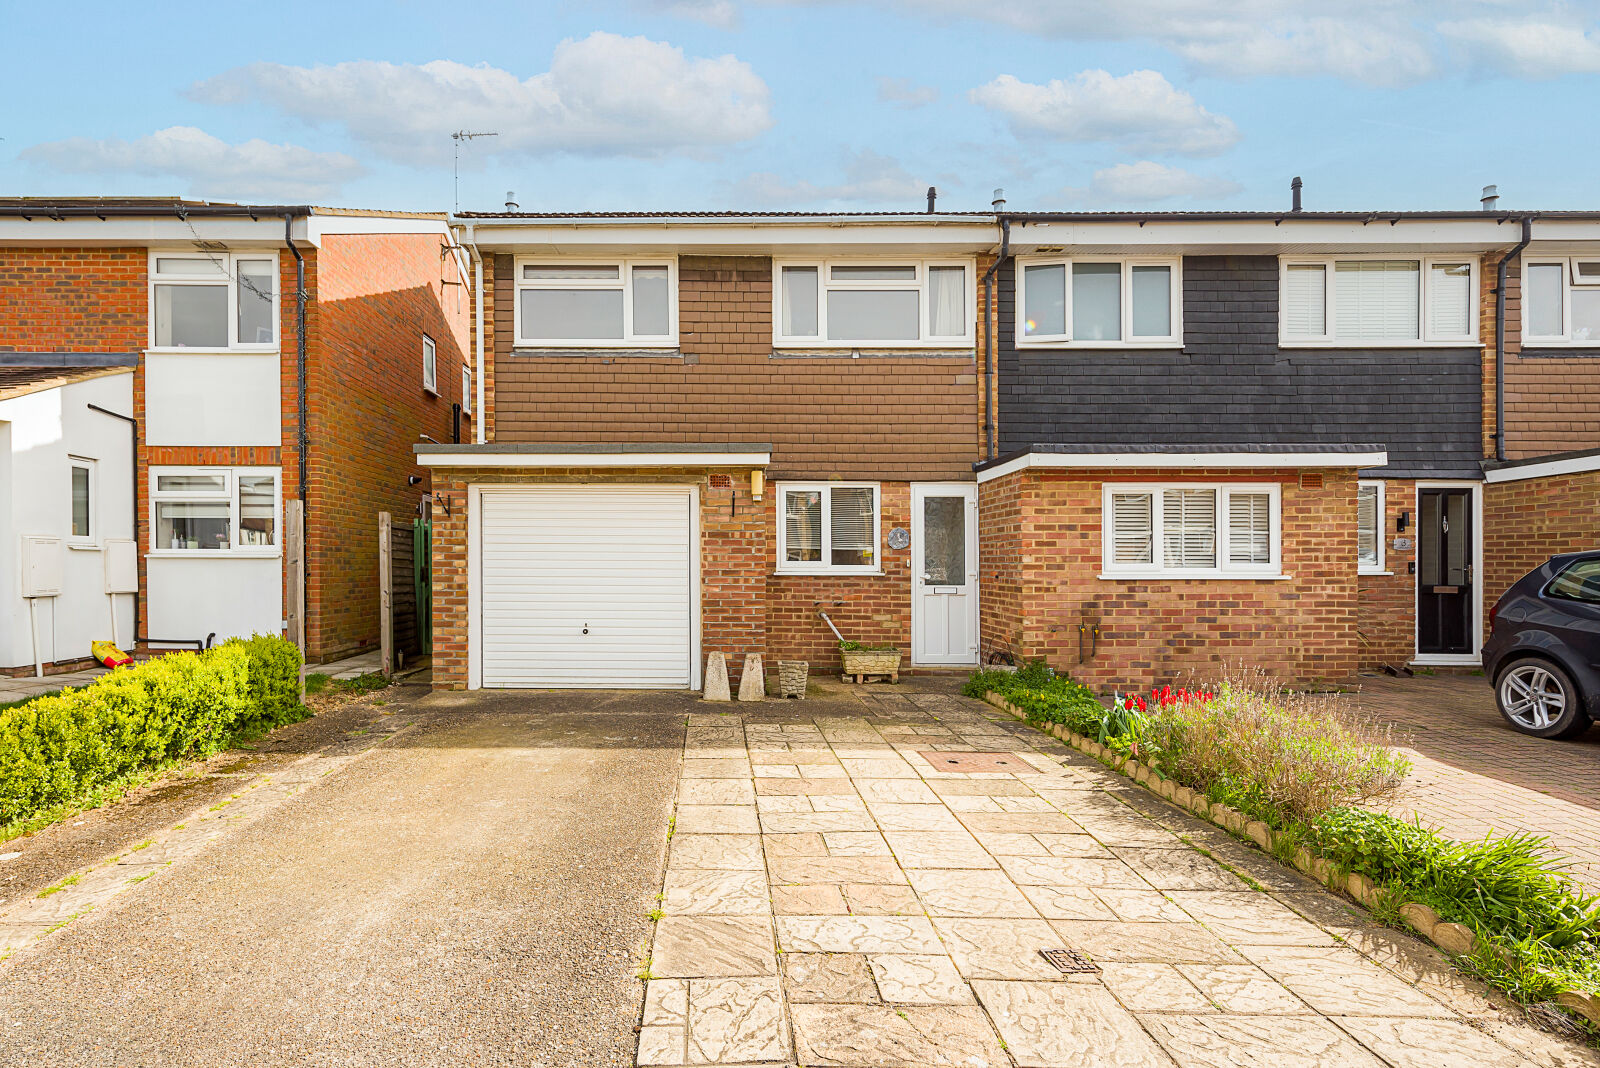 3 bedroom end terraced house for sale Chantry Lane, London Colney, AL2, main image